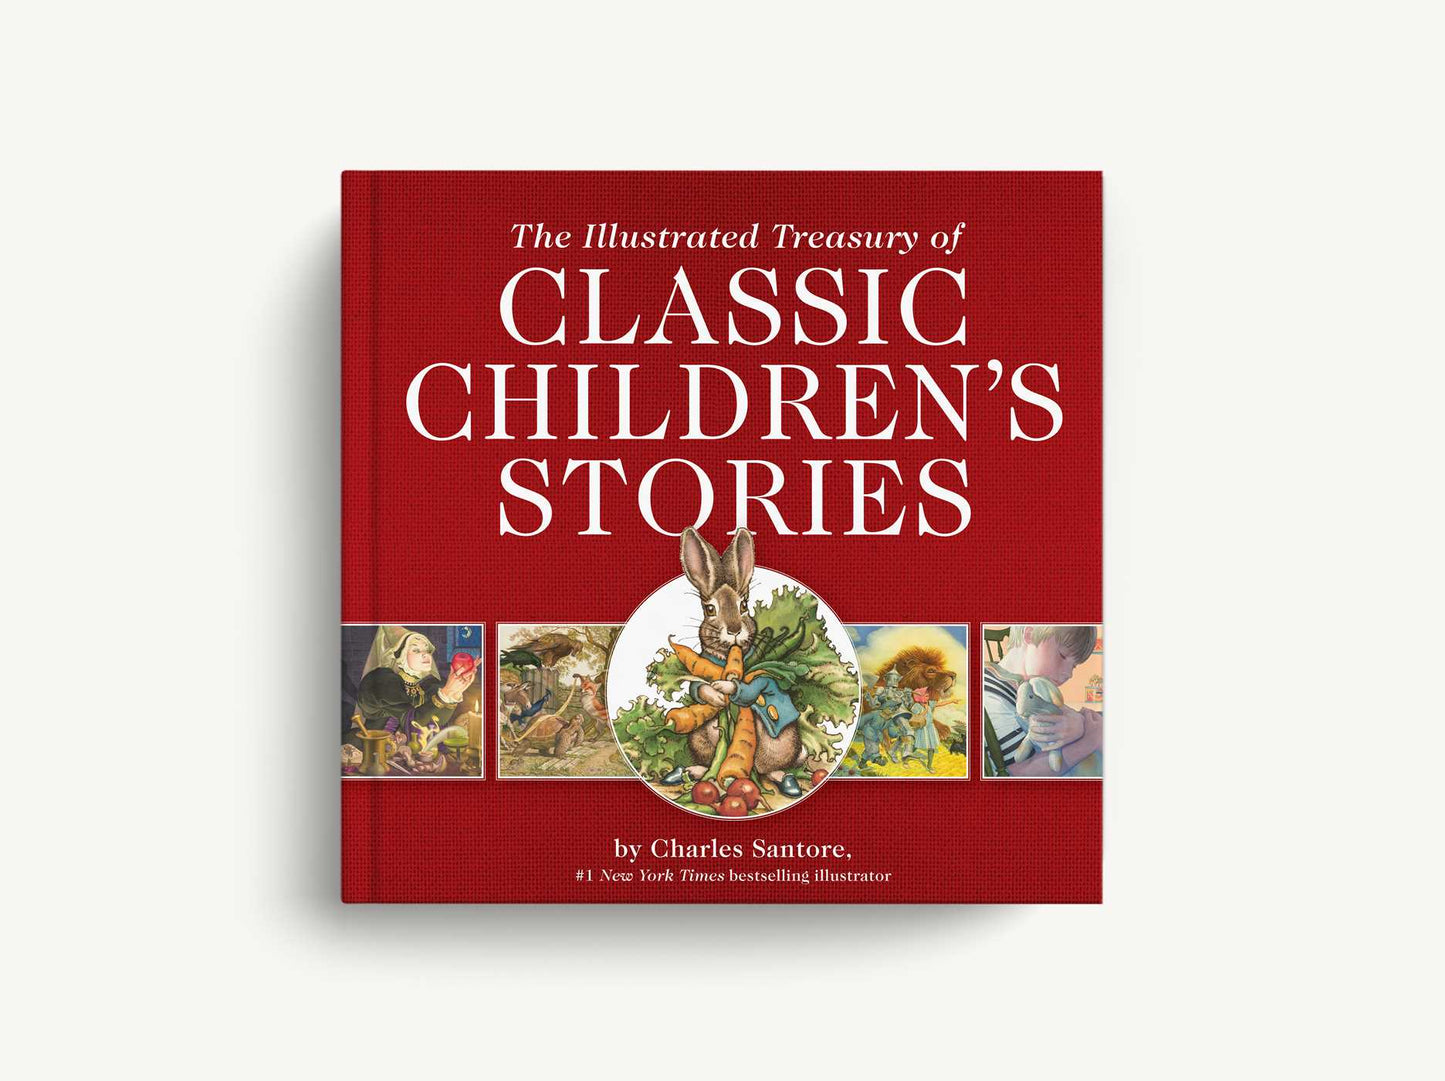 The Illustrated Treasury of Classic Children's Stories: Featuring 14 Classic Children's Books Illustrated by Charles Santore, #1 New York Times Bestseller Illustrator